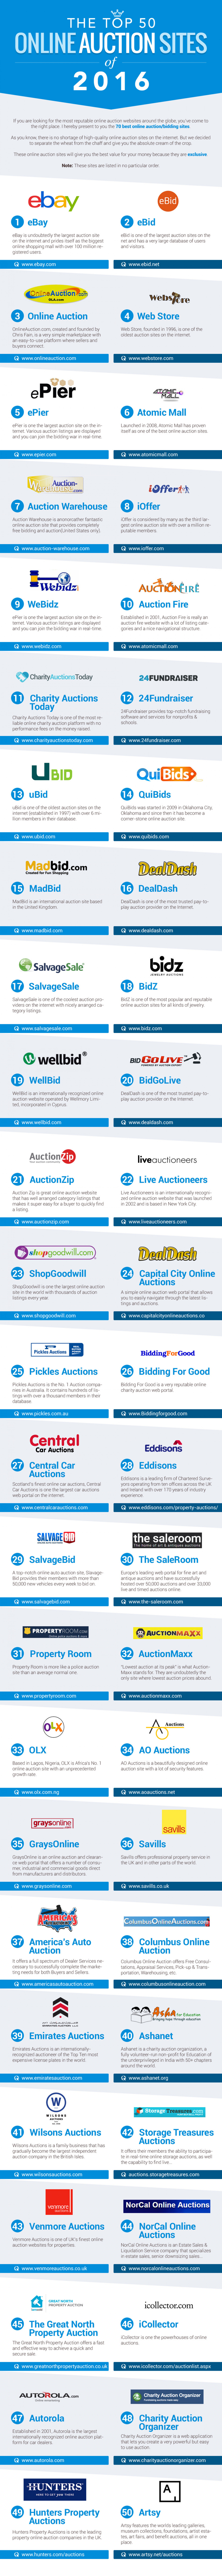 Top 50 Online Auctions Sites of 2016 Infographic